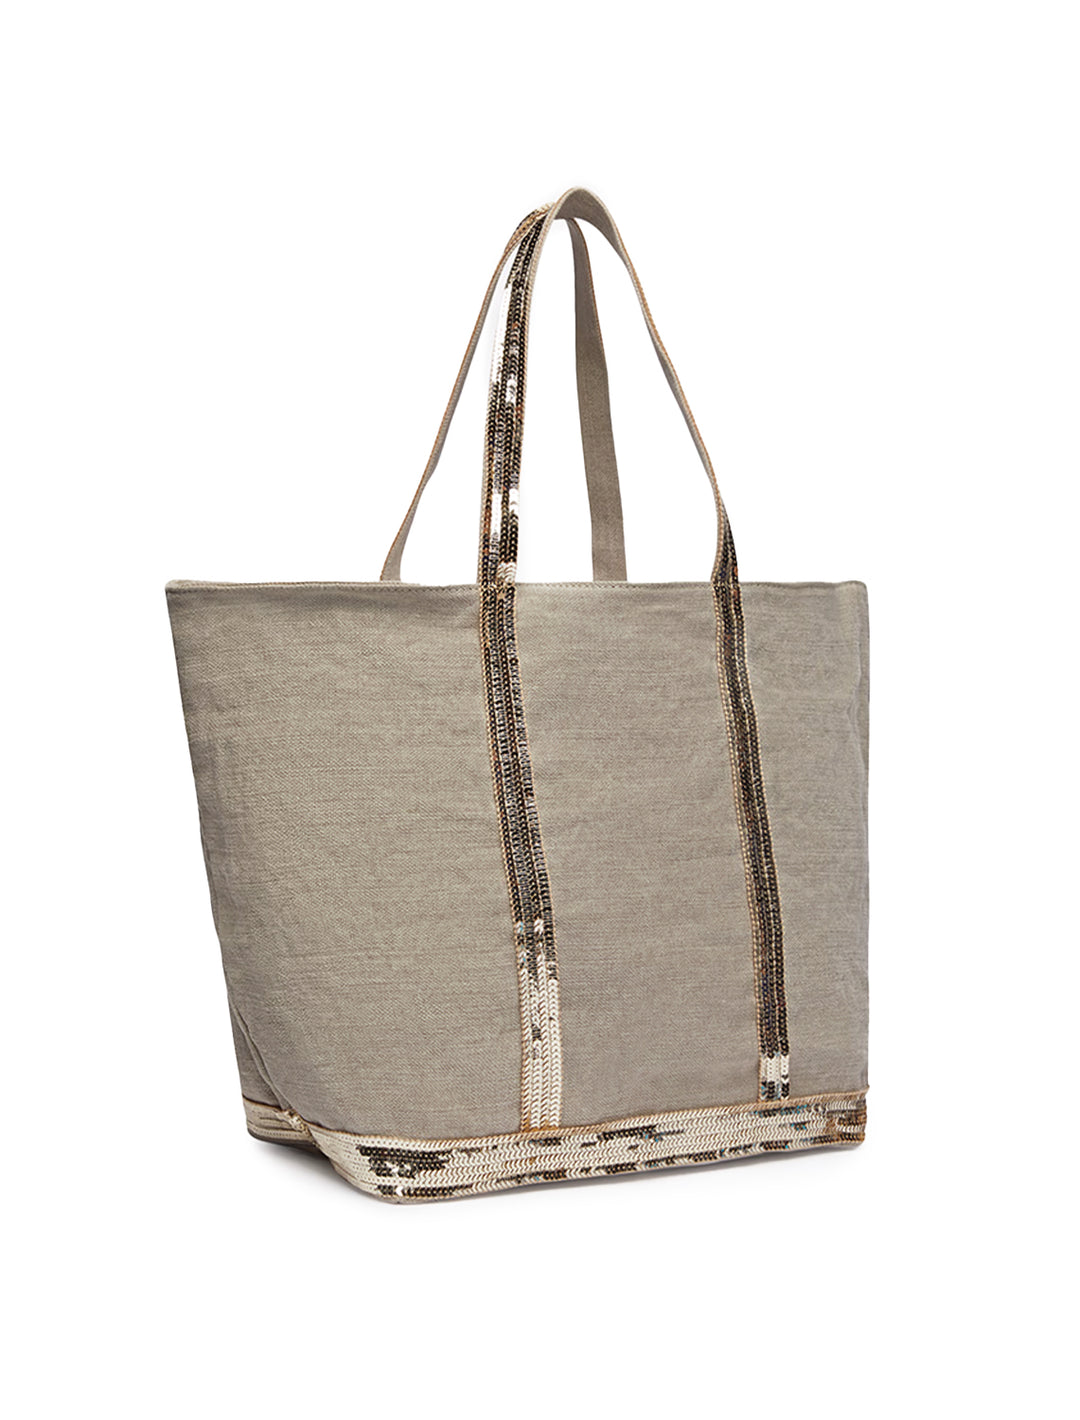 Front angle view of Vanessa Bruno's cabas large tote in sable.